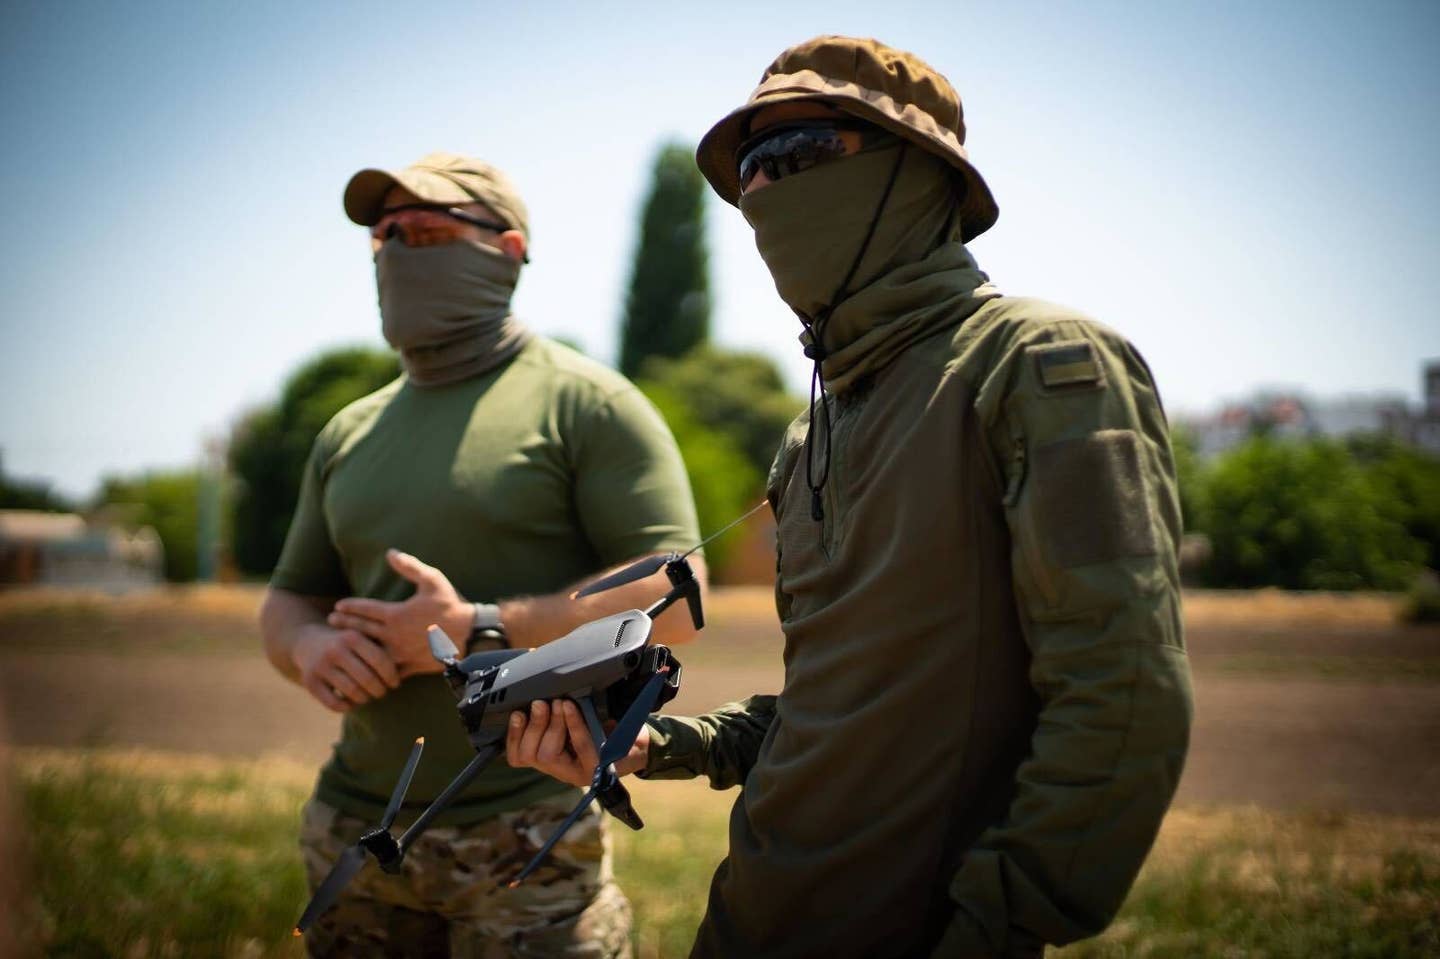 Free Air school instructors teach Ukrainian troops, first responders and law enforcement officers how to pilot drones. (Free Air photo)